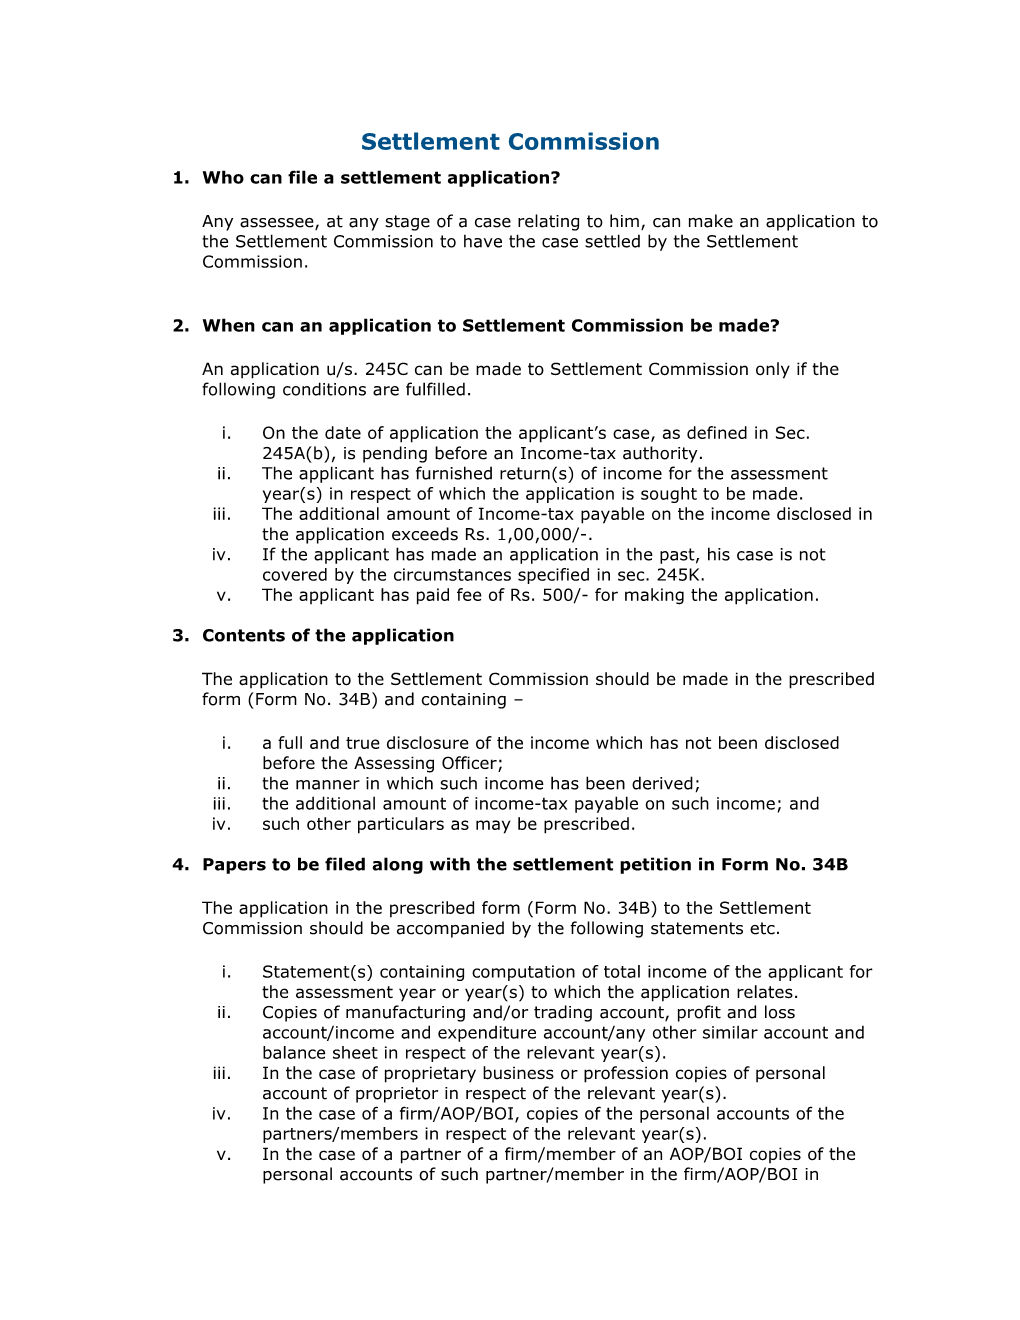 Who Can File a Settlement Application?